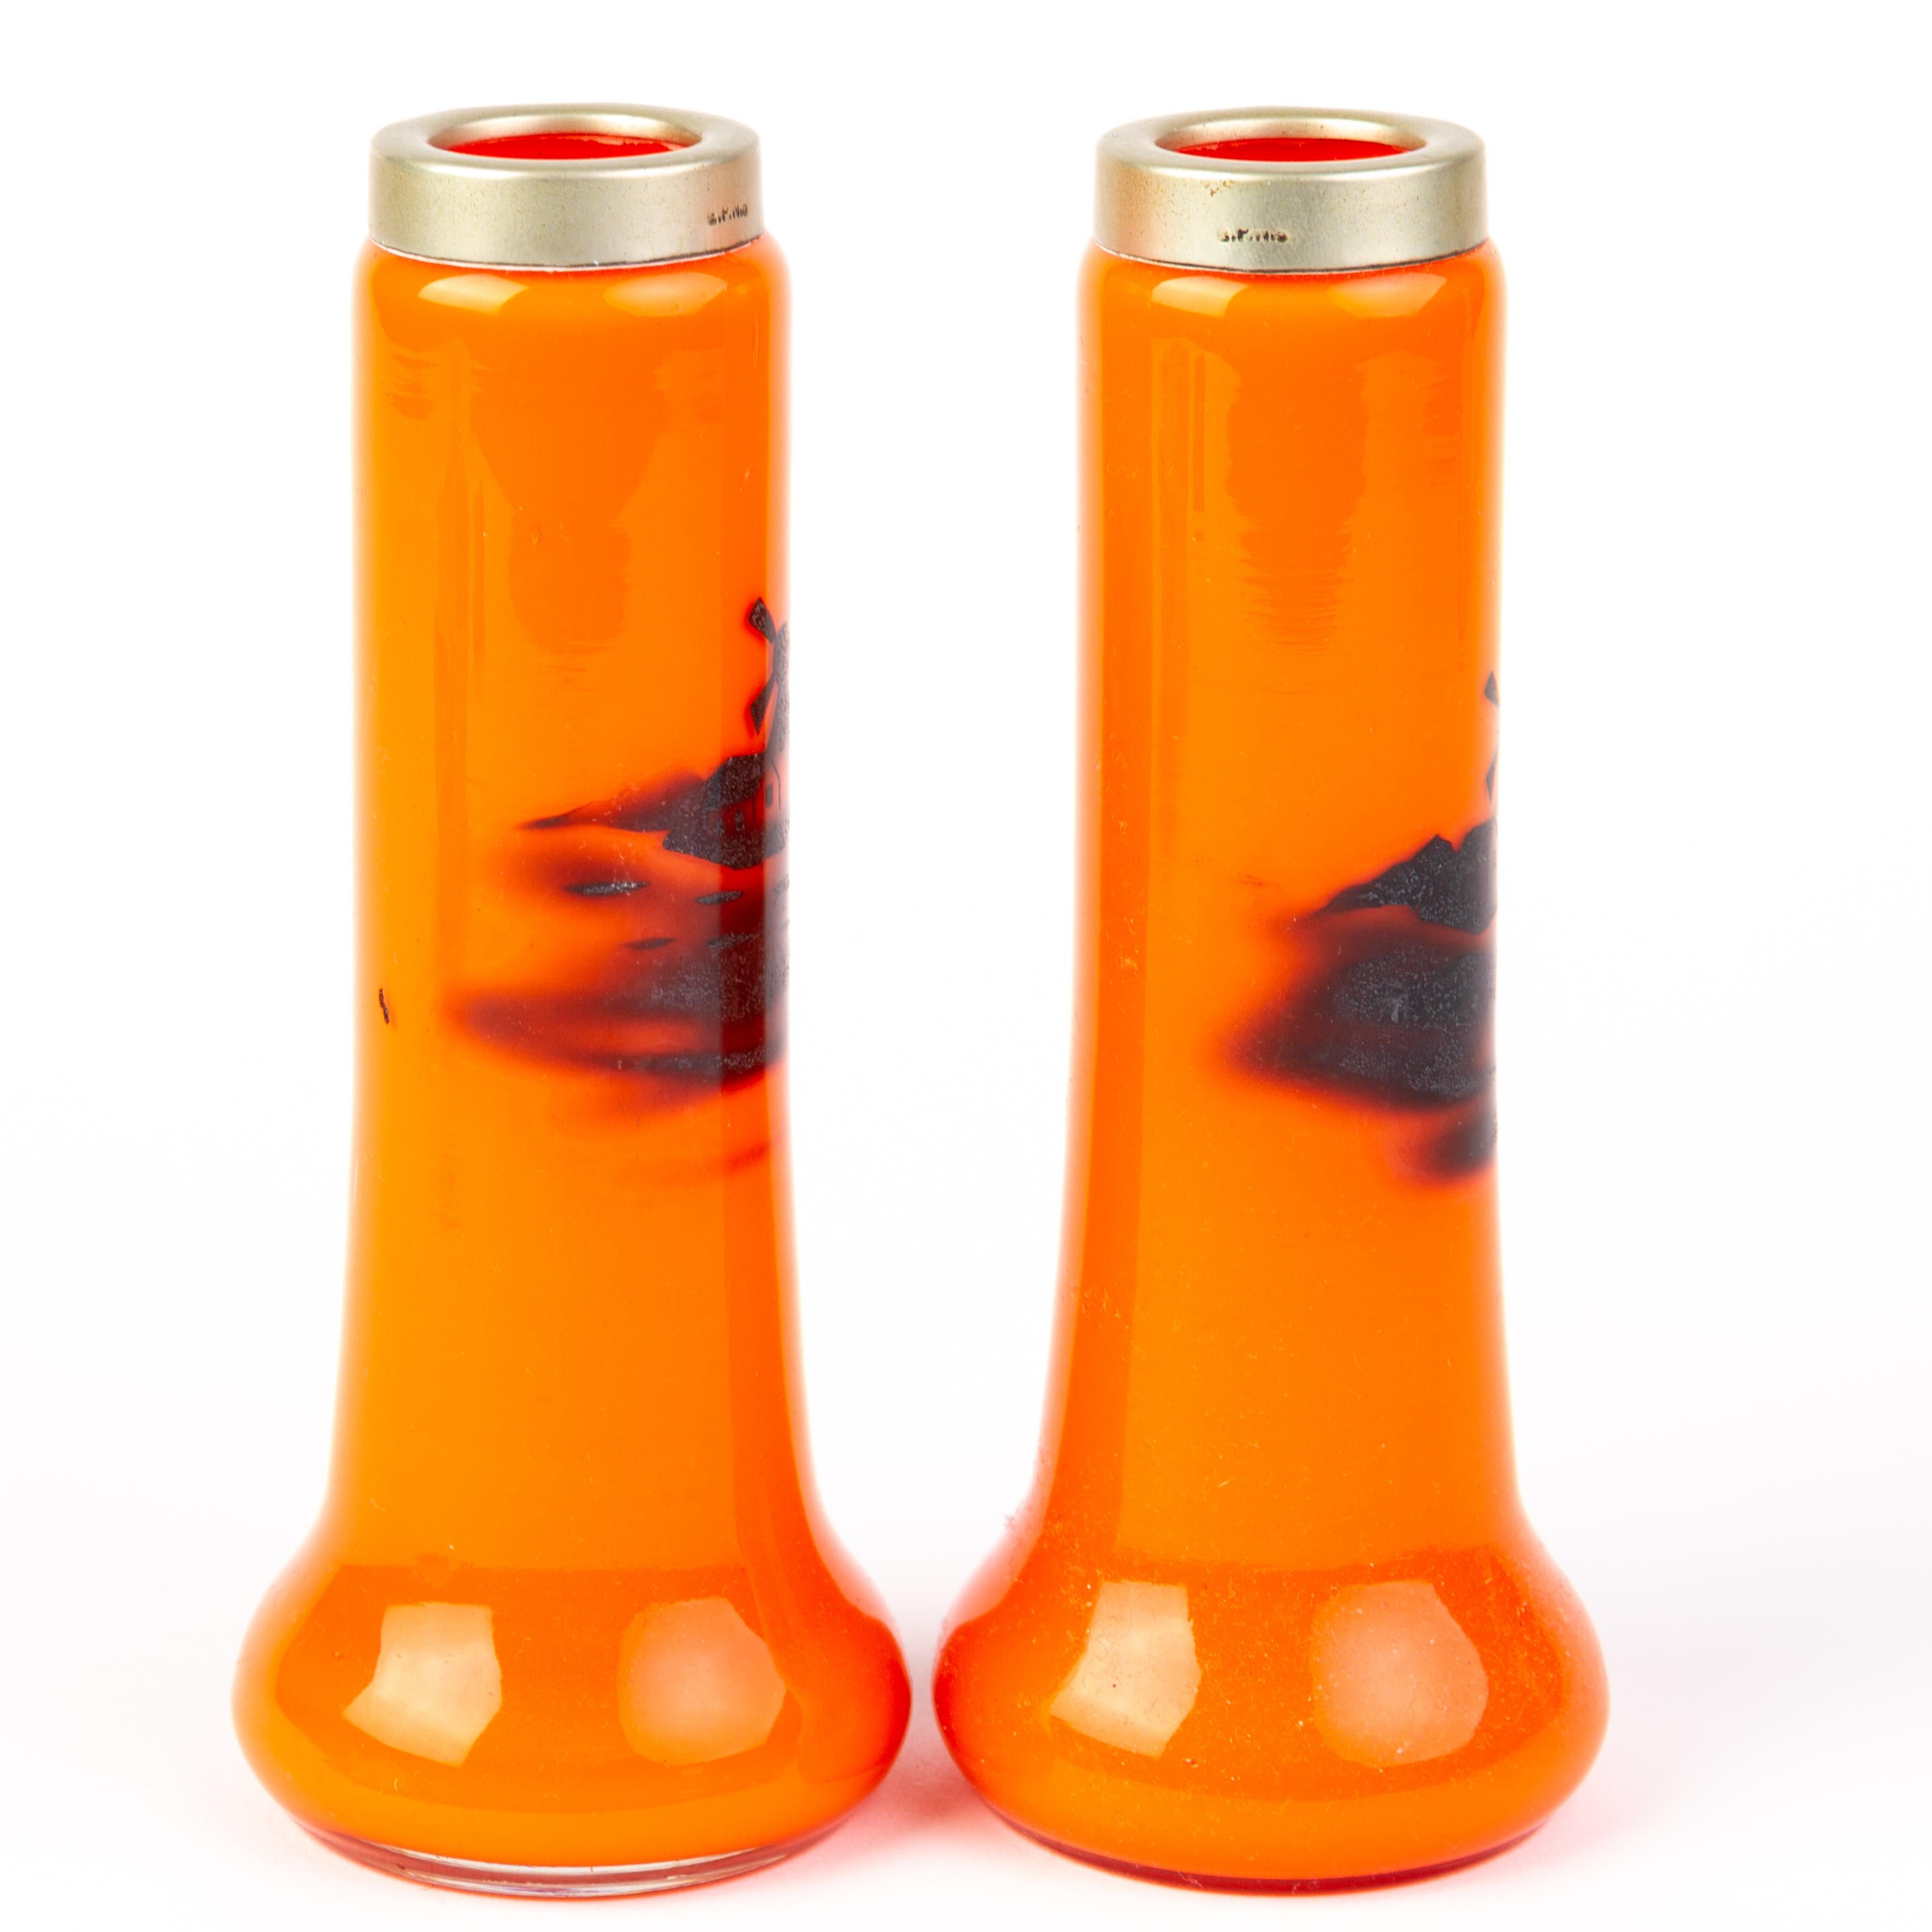 In good condition
From a private collection
Pair of Czech Enamel Silhouette Orange Tango Glass Spill Vases
